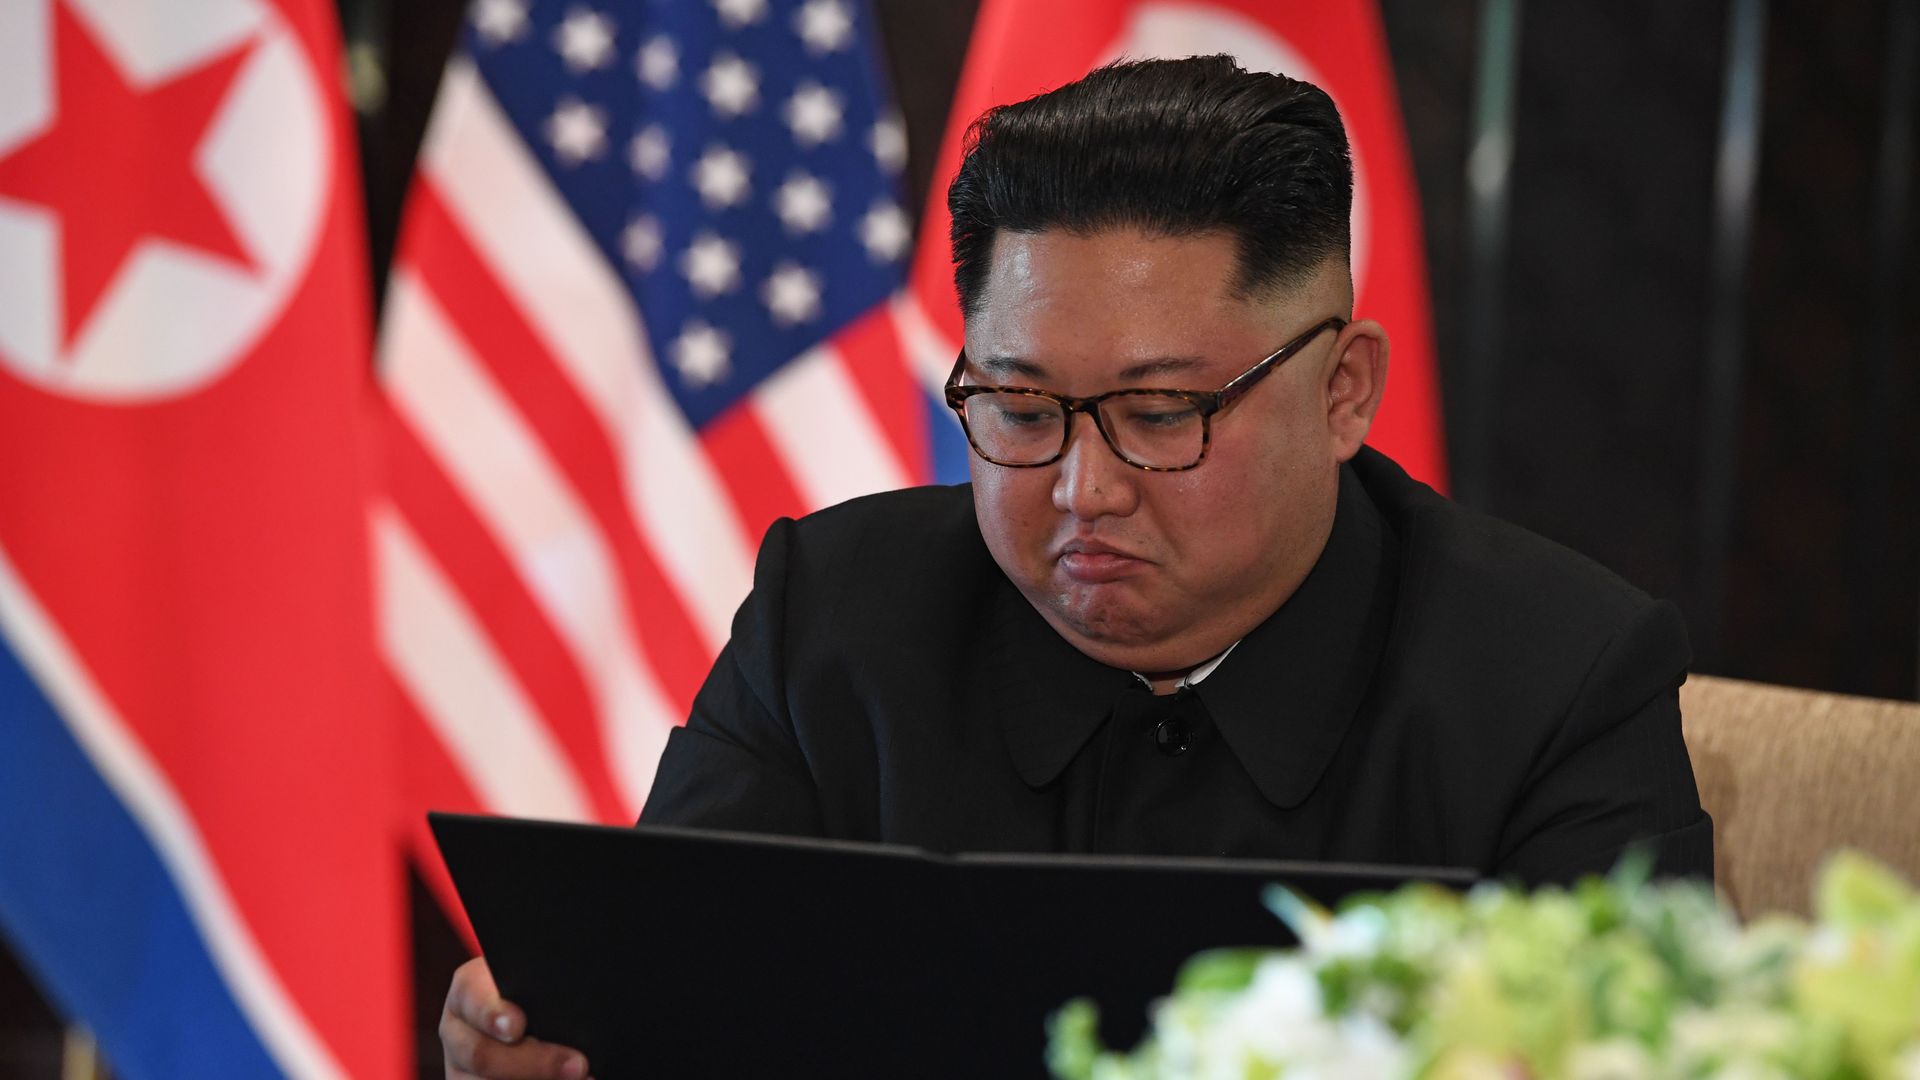  North Korea's leader Kim Jong Un looks at a signing ceremony with US President Donald Trump in Singapore on June 12, 2018. 